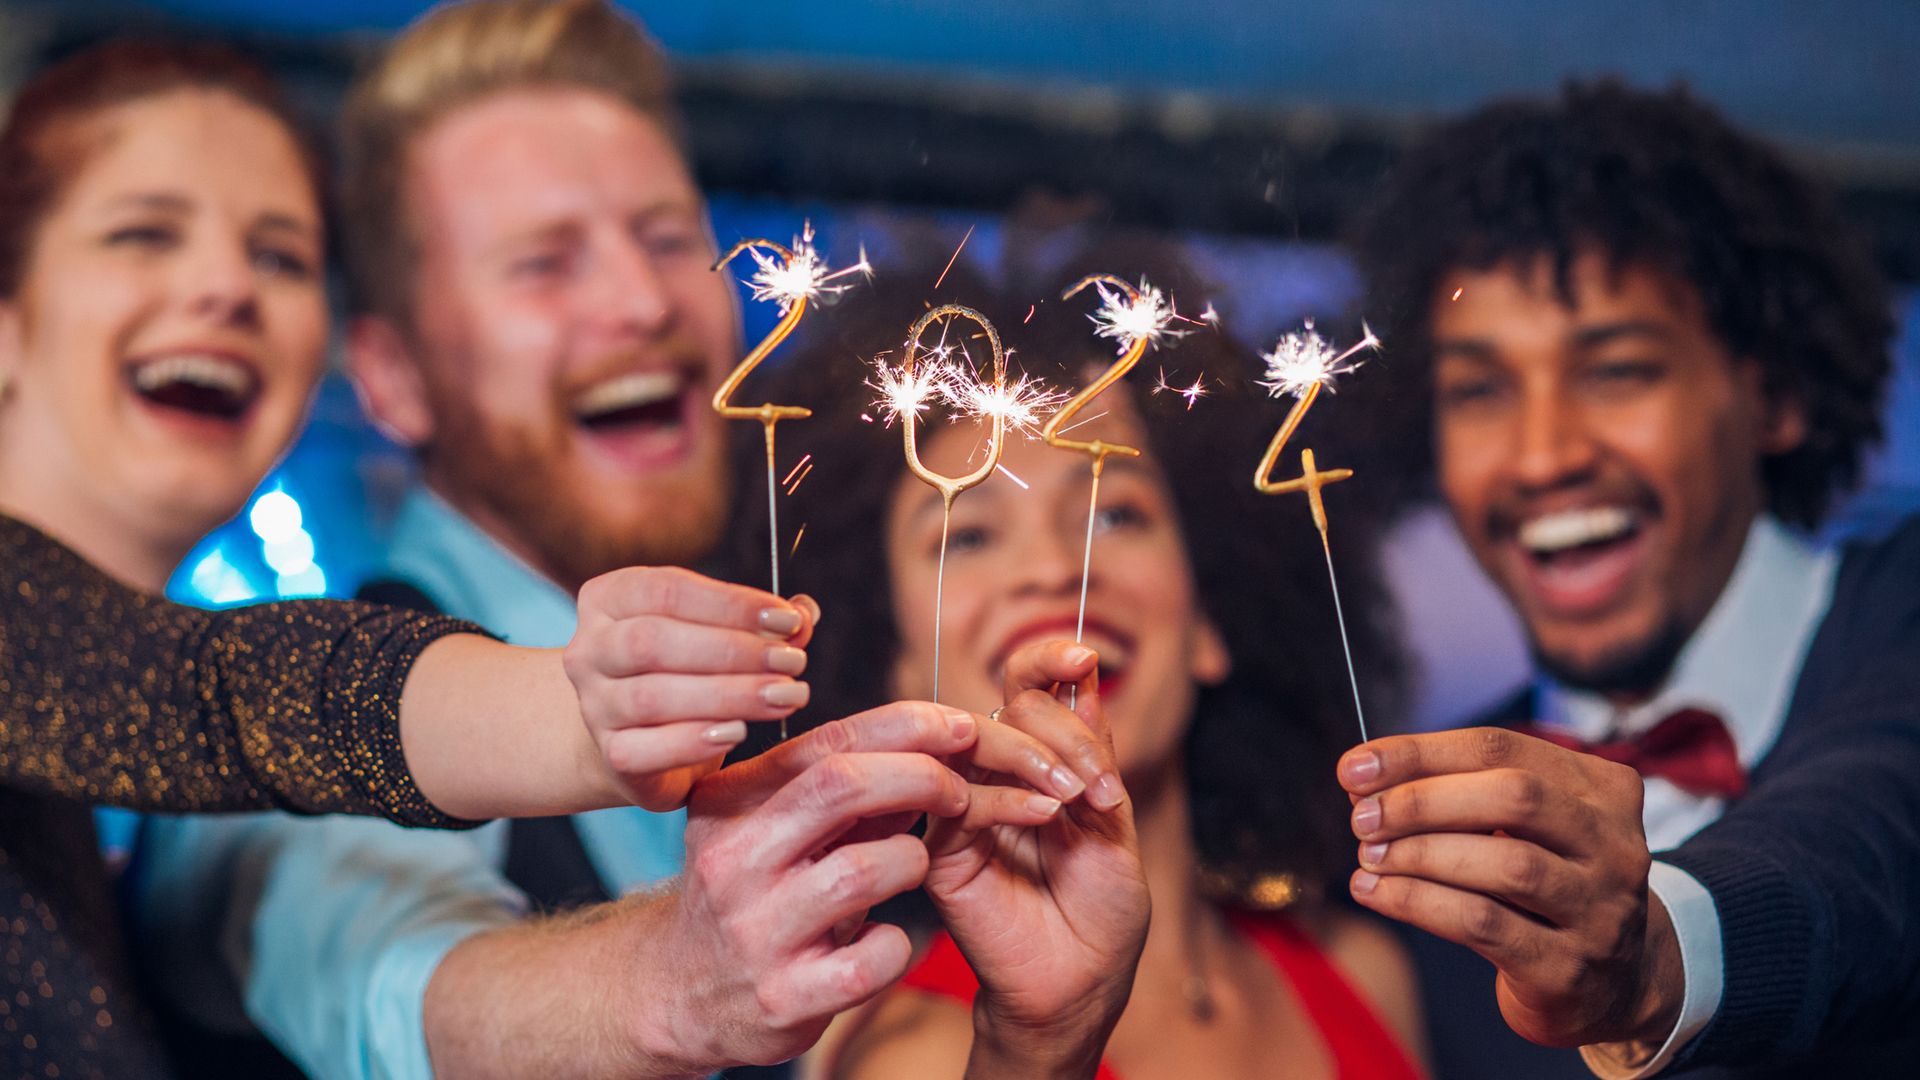 Celebrity party planner reveals 5 easy ways to host the ultimate New Year's party on a budget